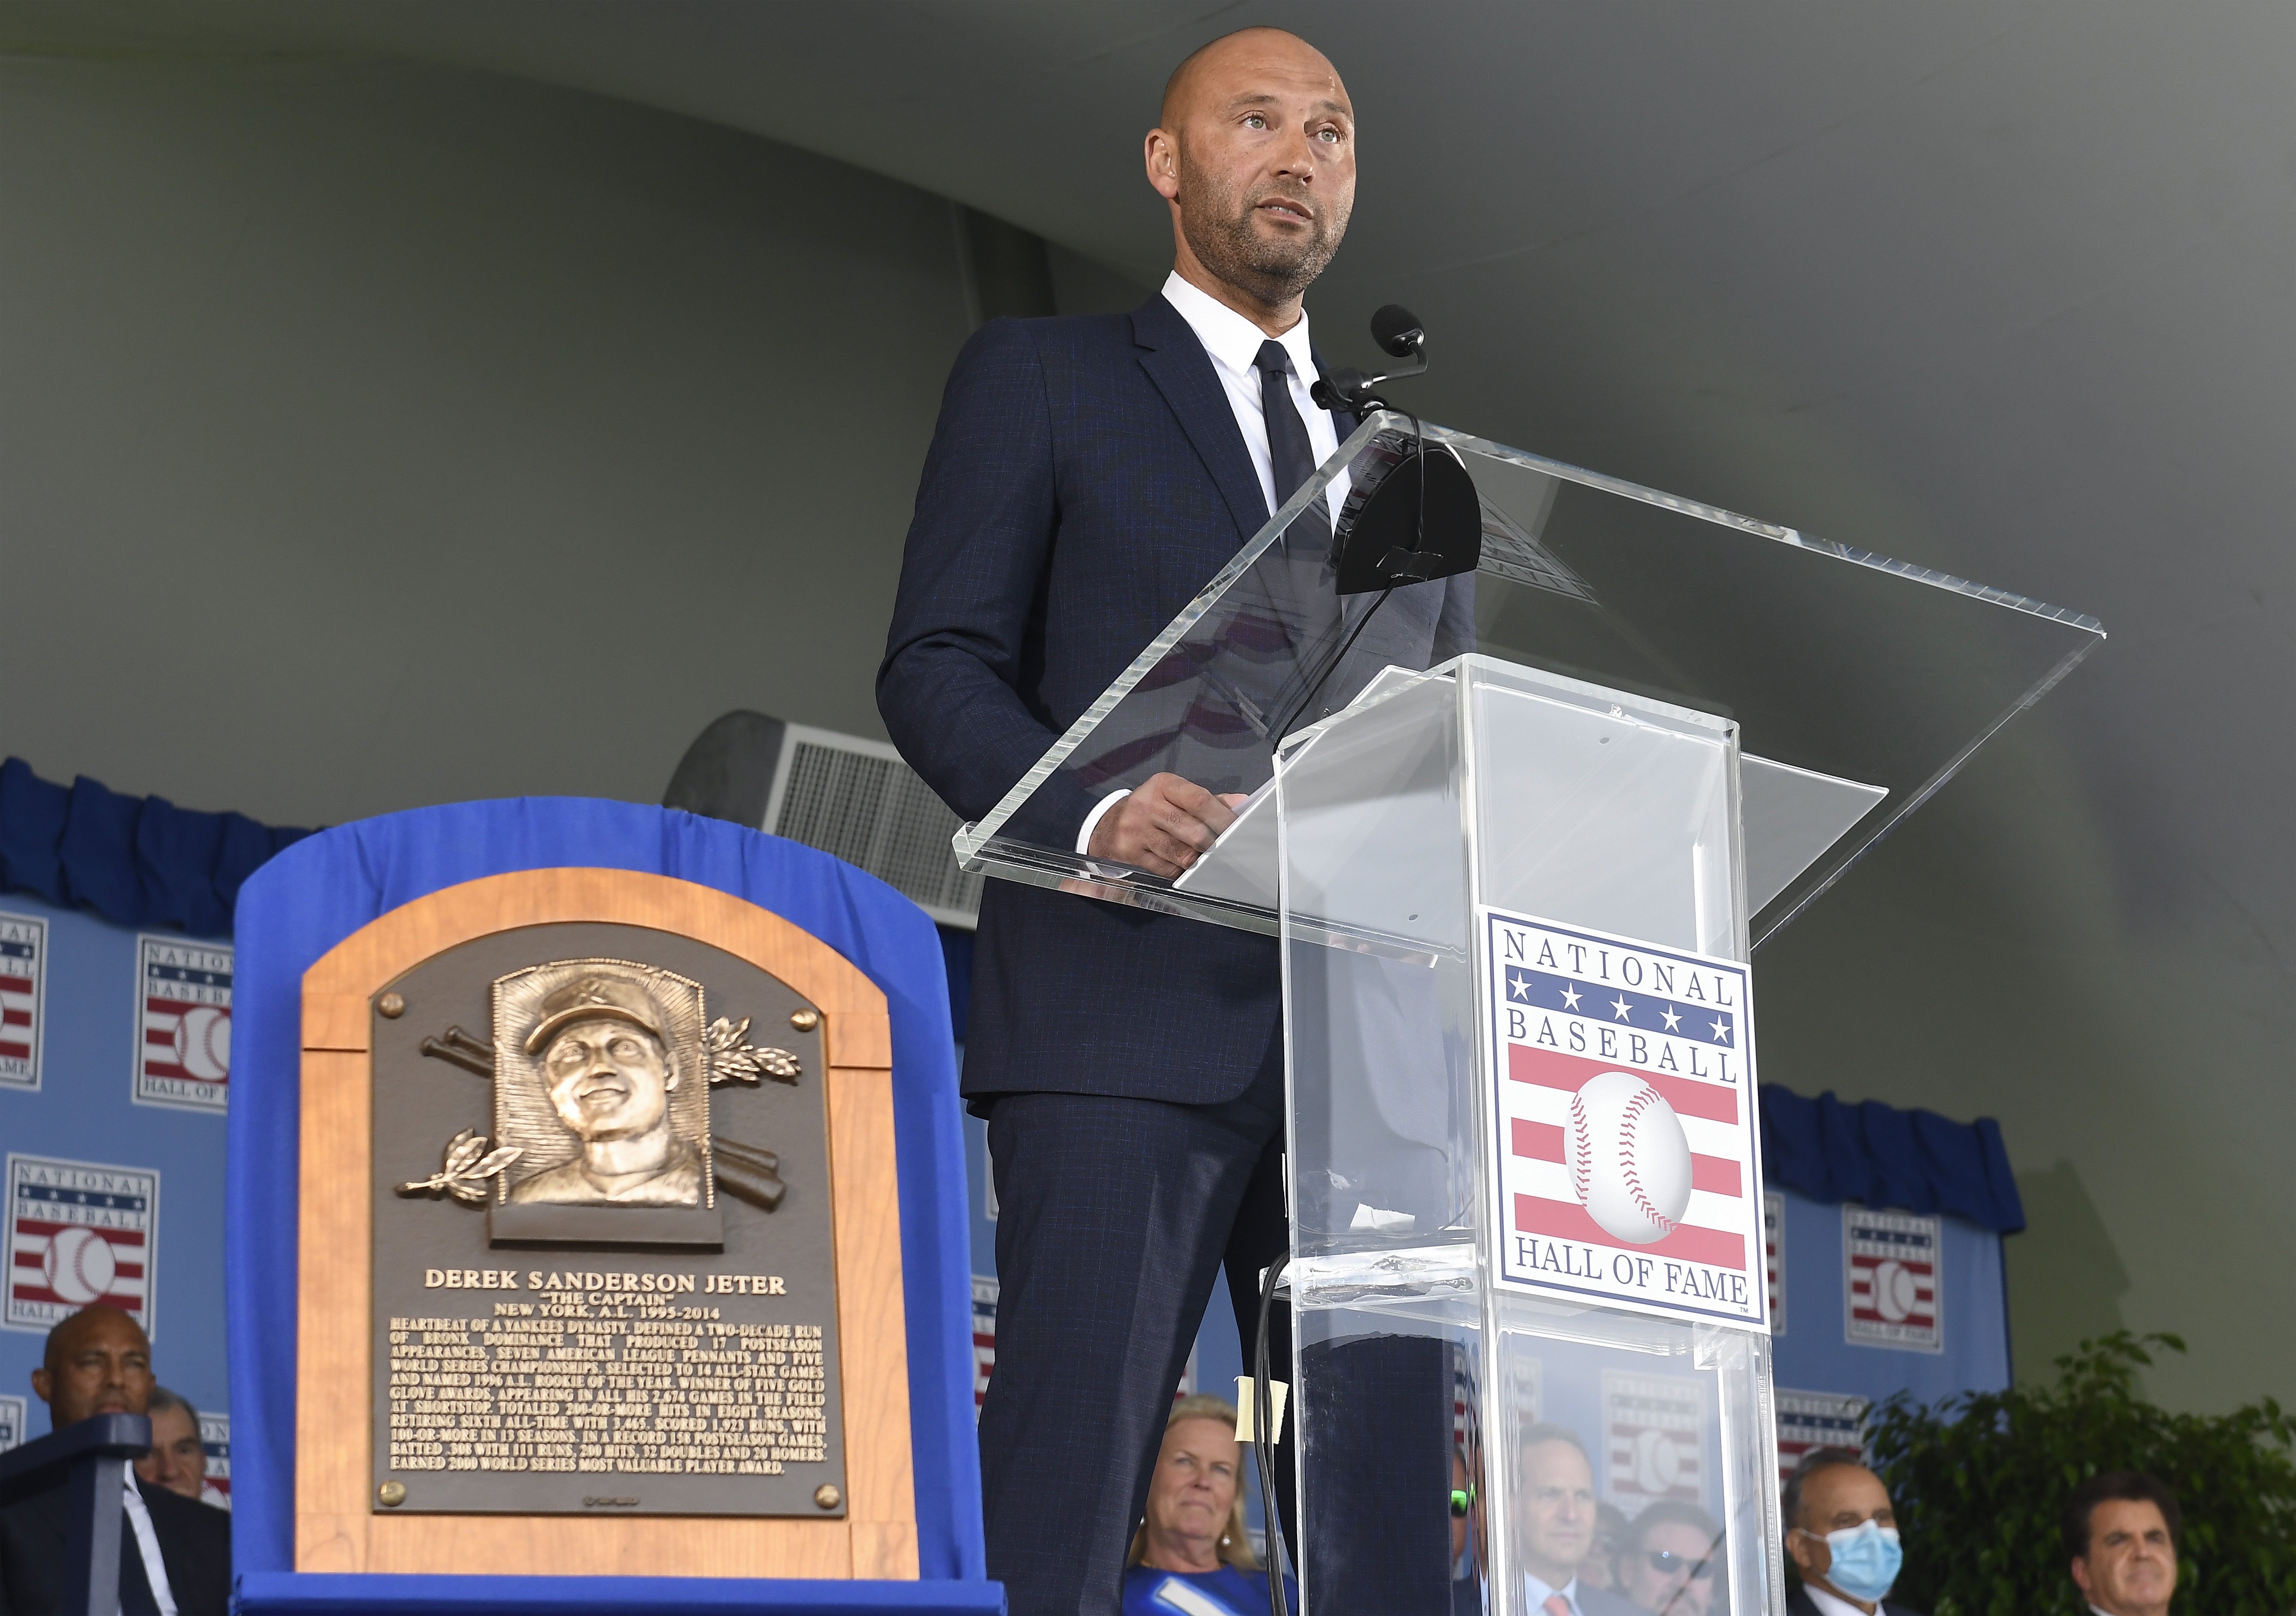 The Captain' documentary explores Derek Jeter's life and legacy